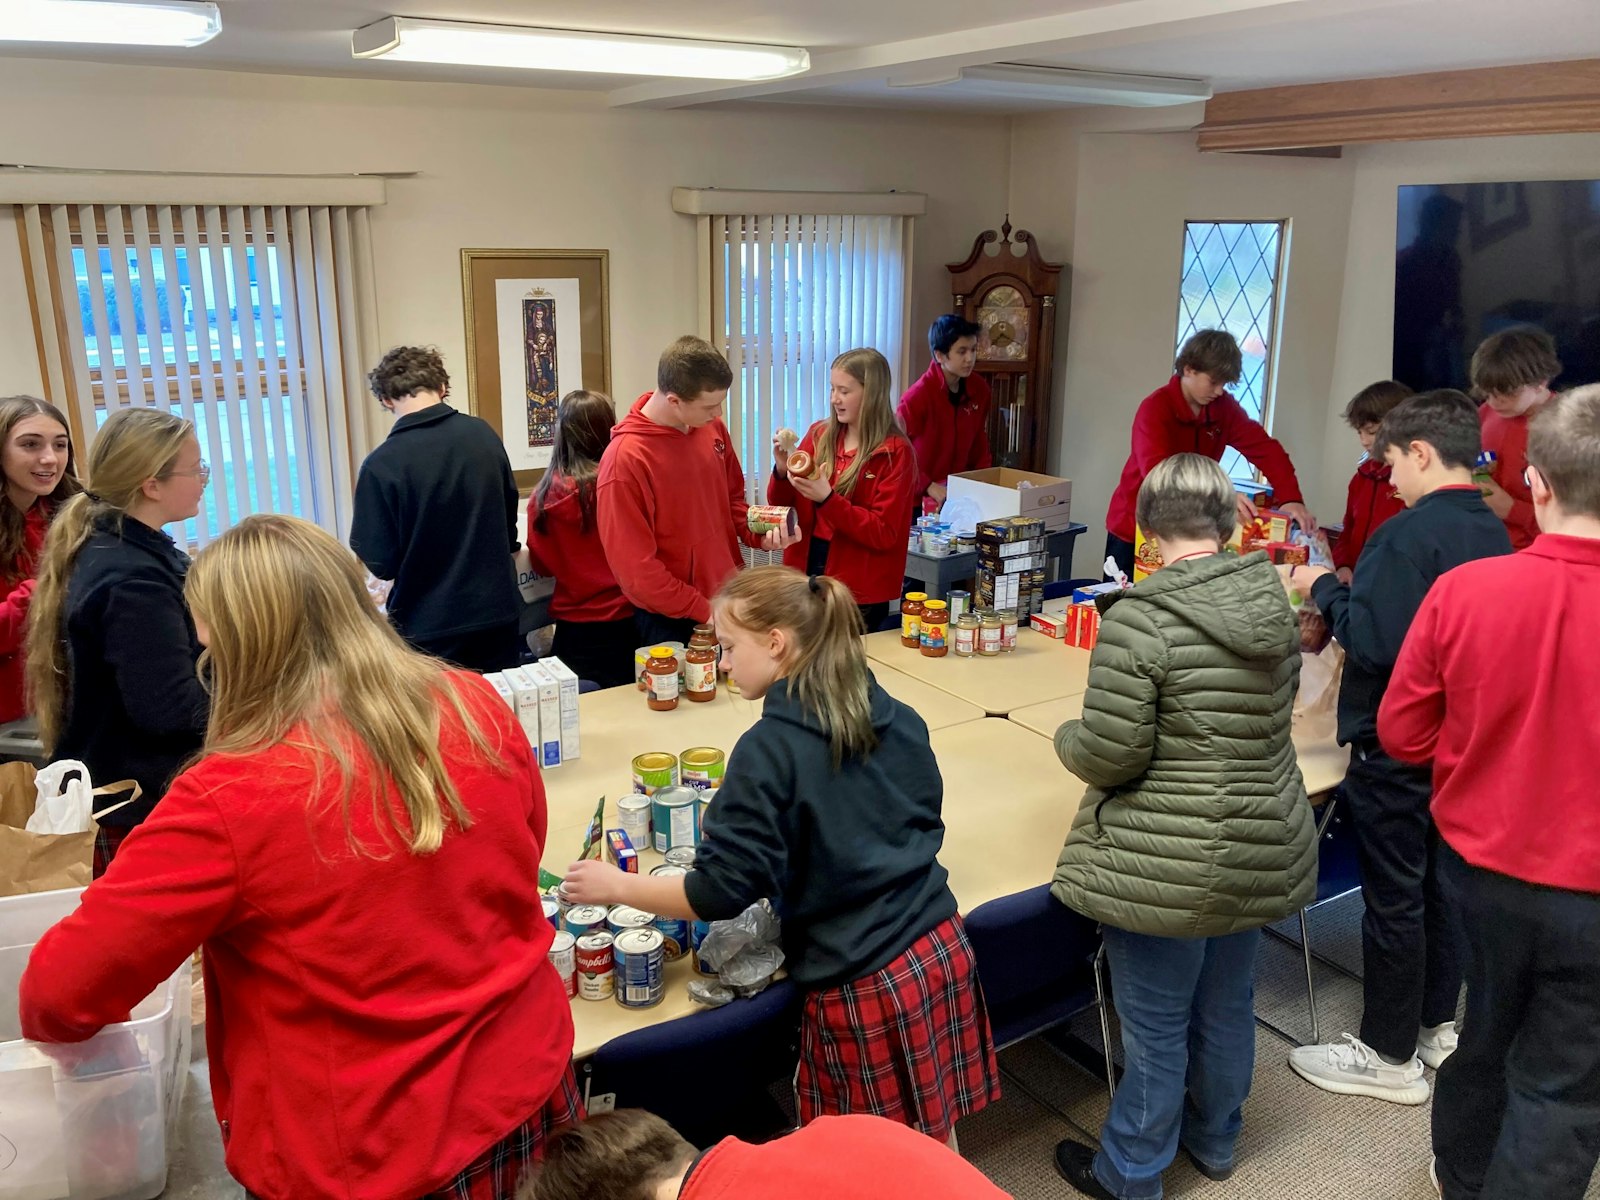 Eighth-graders at St. Joseph School in Trenton organize more than 150 food baskets that were distributed by the Society of St. Vincent de Paul at St. Joseph Parish. (Photo courtesy of St. Joseph School)